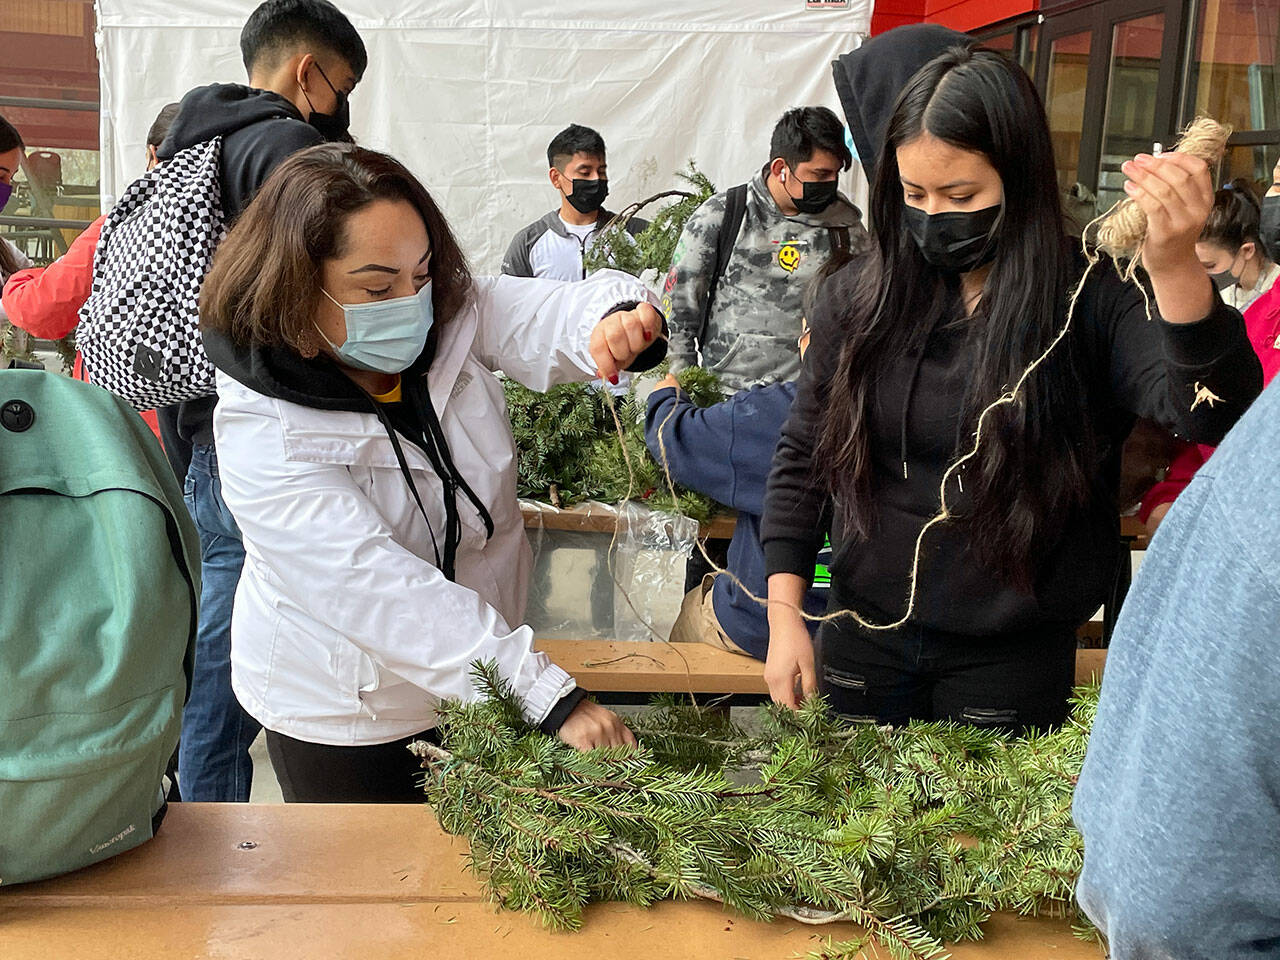 (Courtesy Photo) Nidia Sahagun, Vashon Island School District’s family engagement coordinator, works with students in VHS’s LatinX student club to construct wreaths. The project was undertaken with Valeria Martinez Espinoza, from Vashon Nature Center.